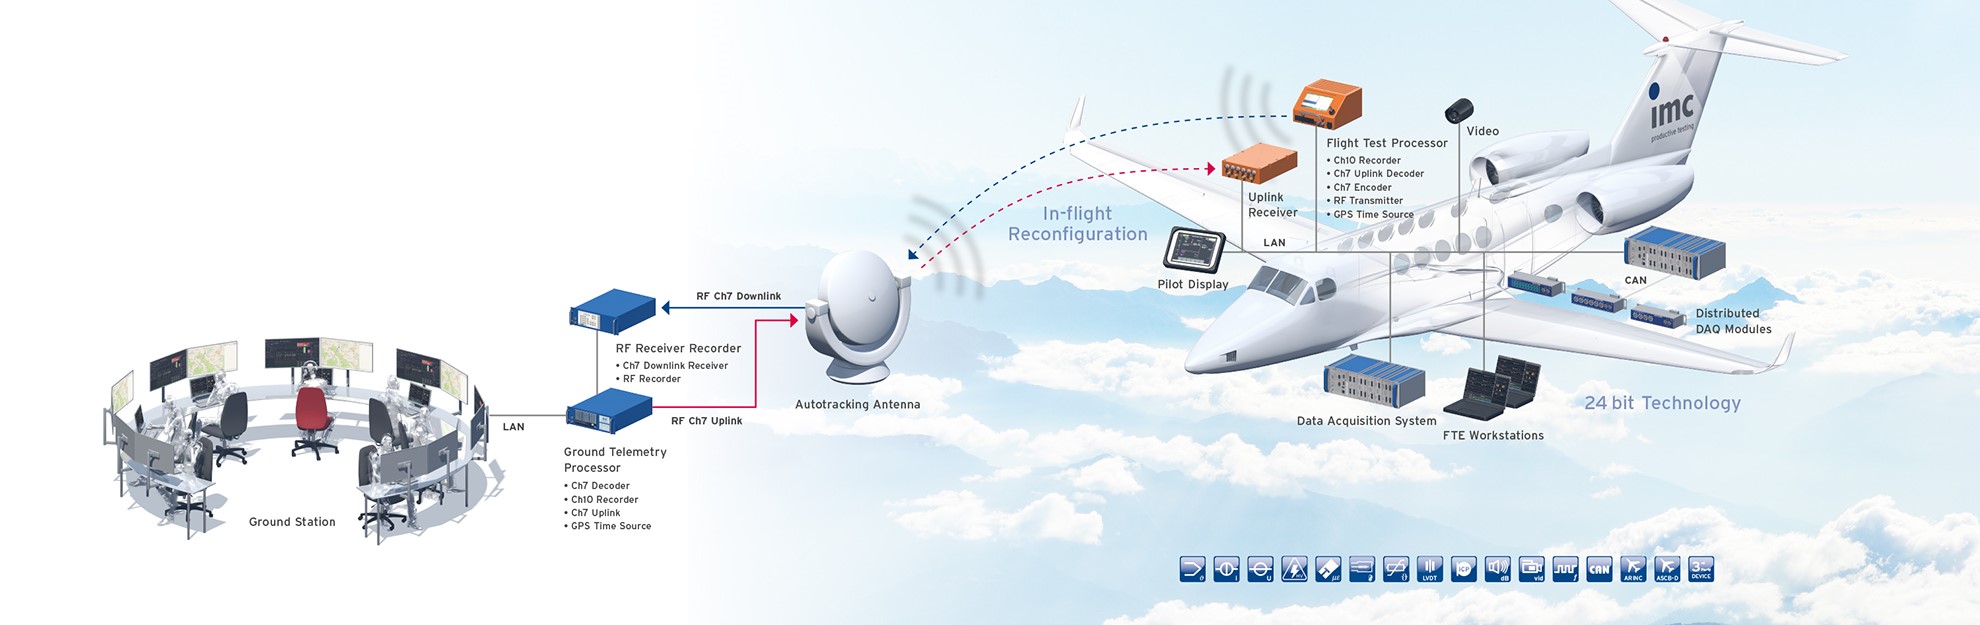 [Translate to English (Int.):] Flight Test Instrumentation solutions according to IRIG standards